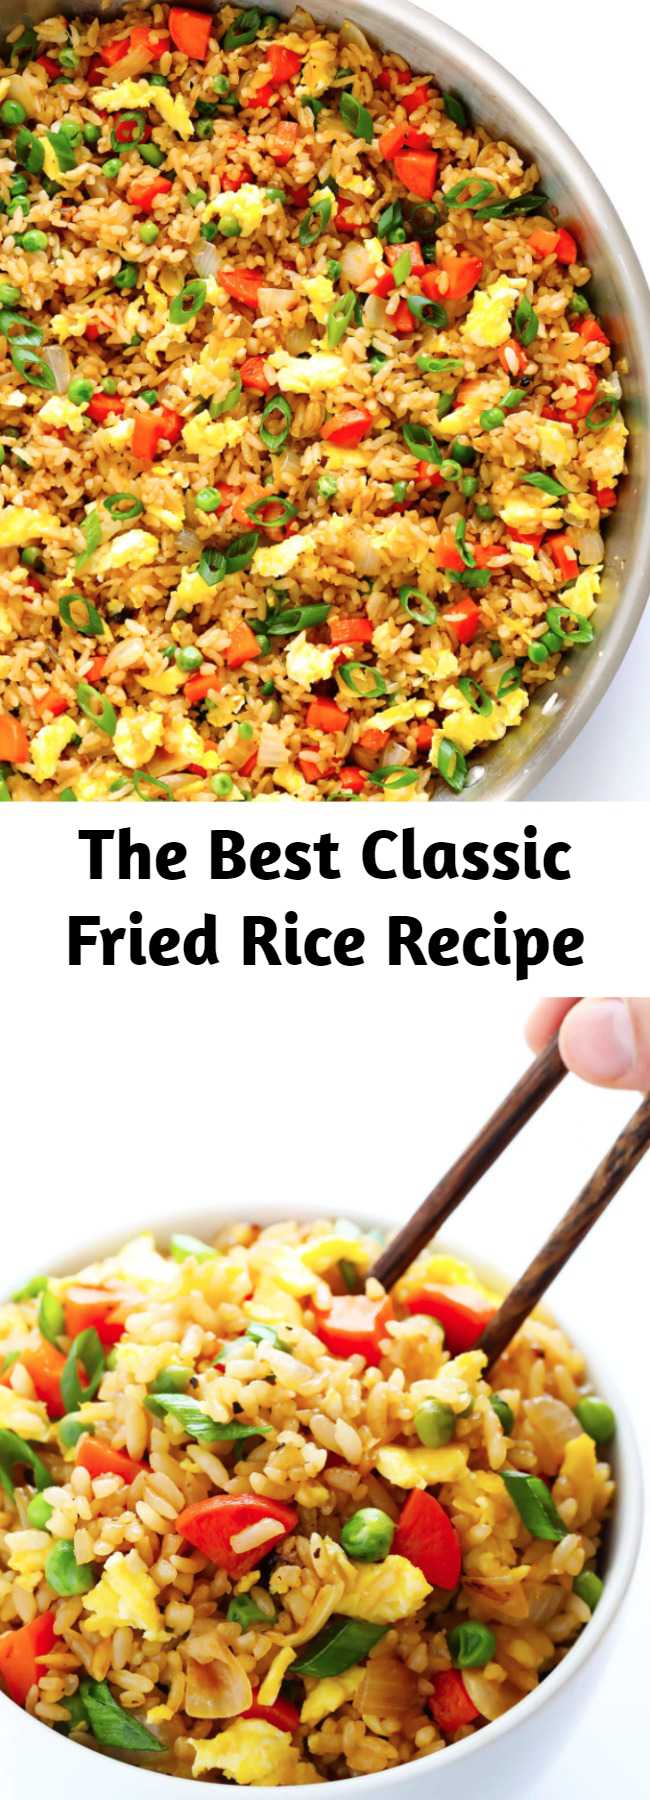 The Best Classic Fried Rice Recipe - Learn how to make fried rice with this classic recipe. It only takes 15 minutes to make, it’s easy to customize with your favorite add-ins, and it’s SO flavorful and delicious!